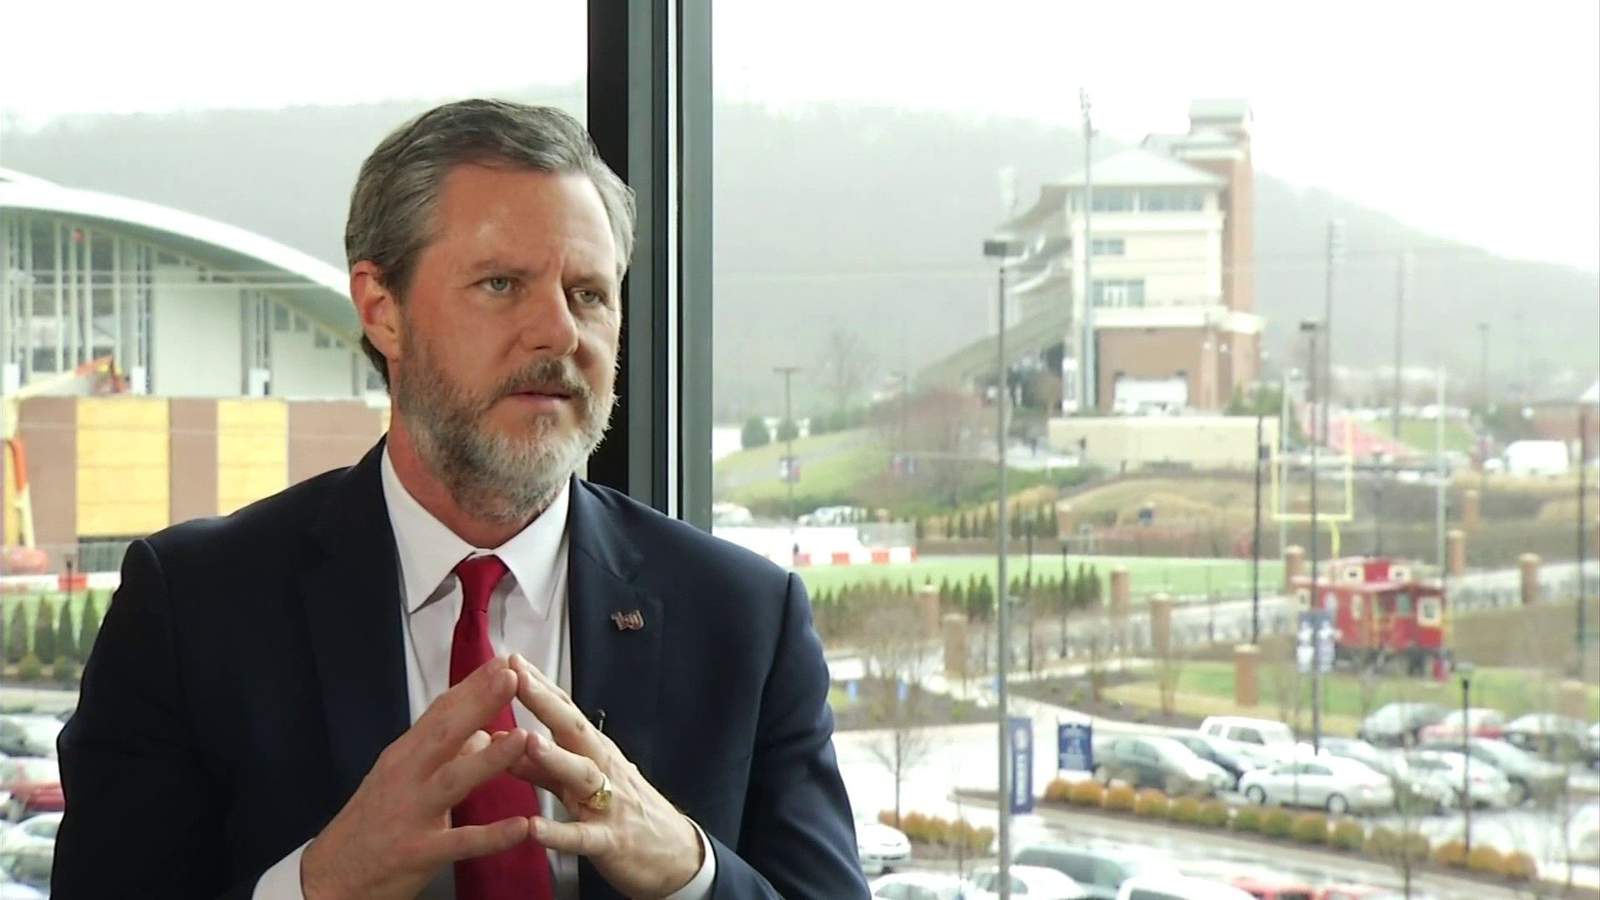 Jerry Falwell Jr. taking ‘indefinite leave of absence’ from role as Liberty University President